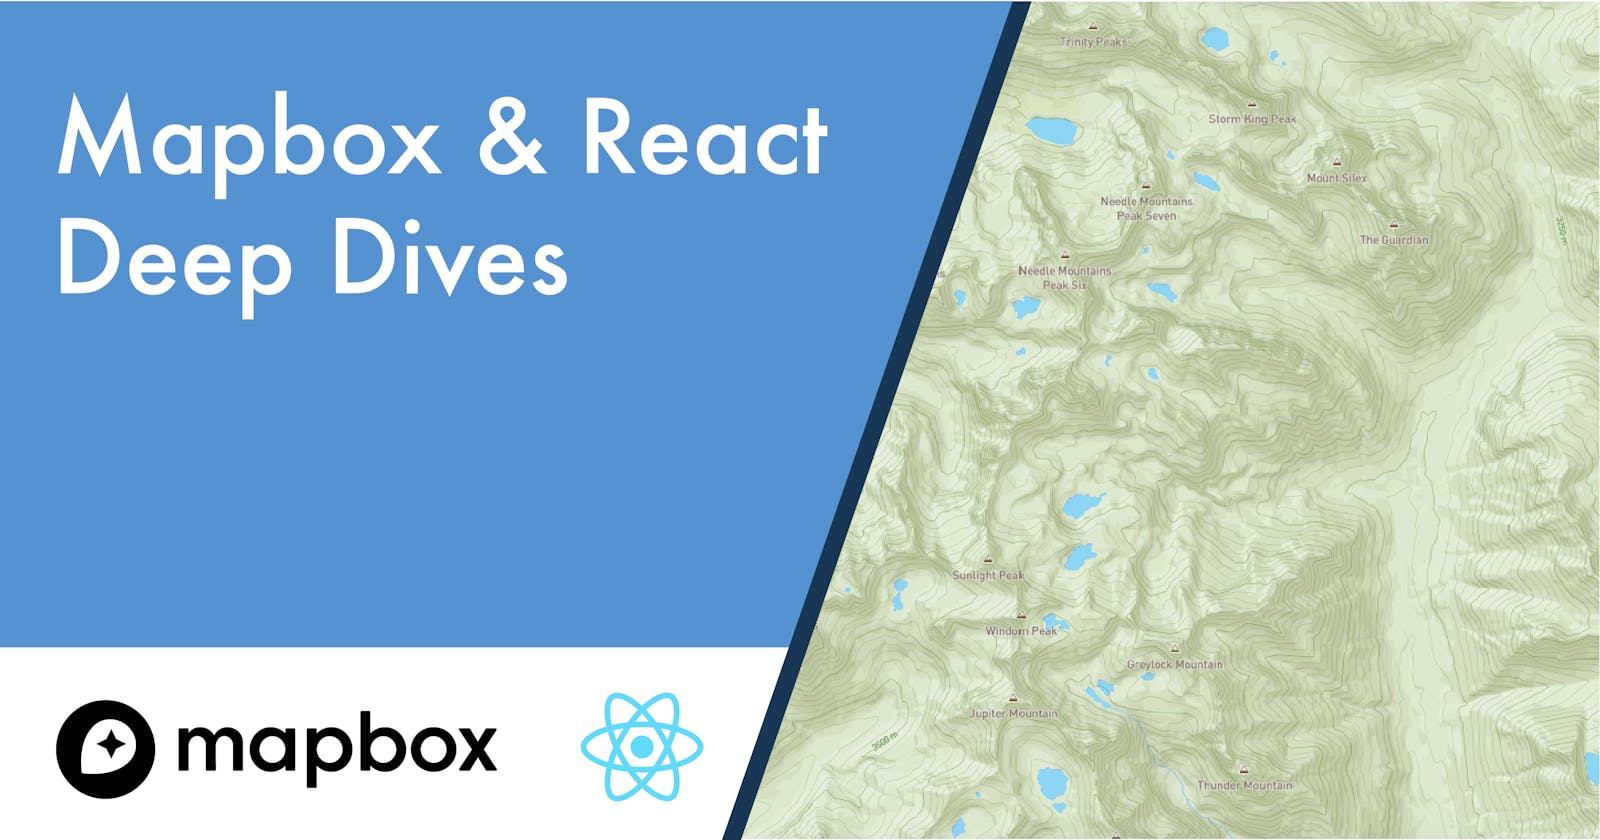 Introduction to Mapbox and React